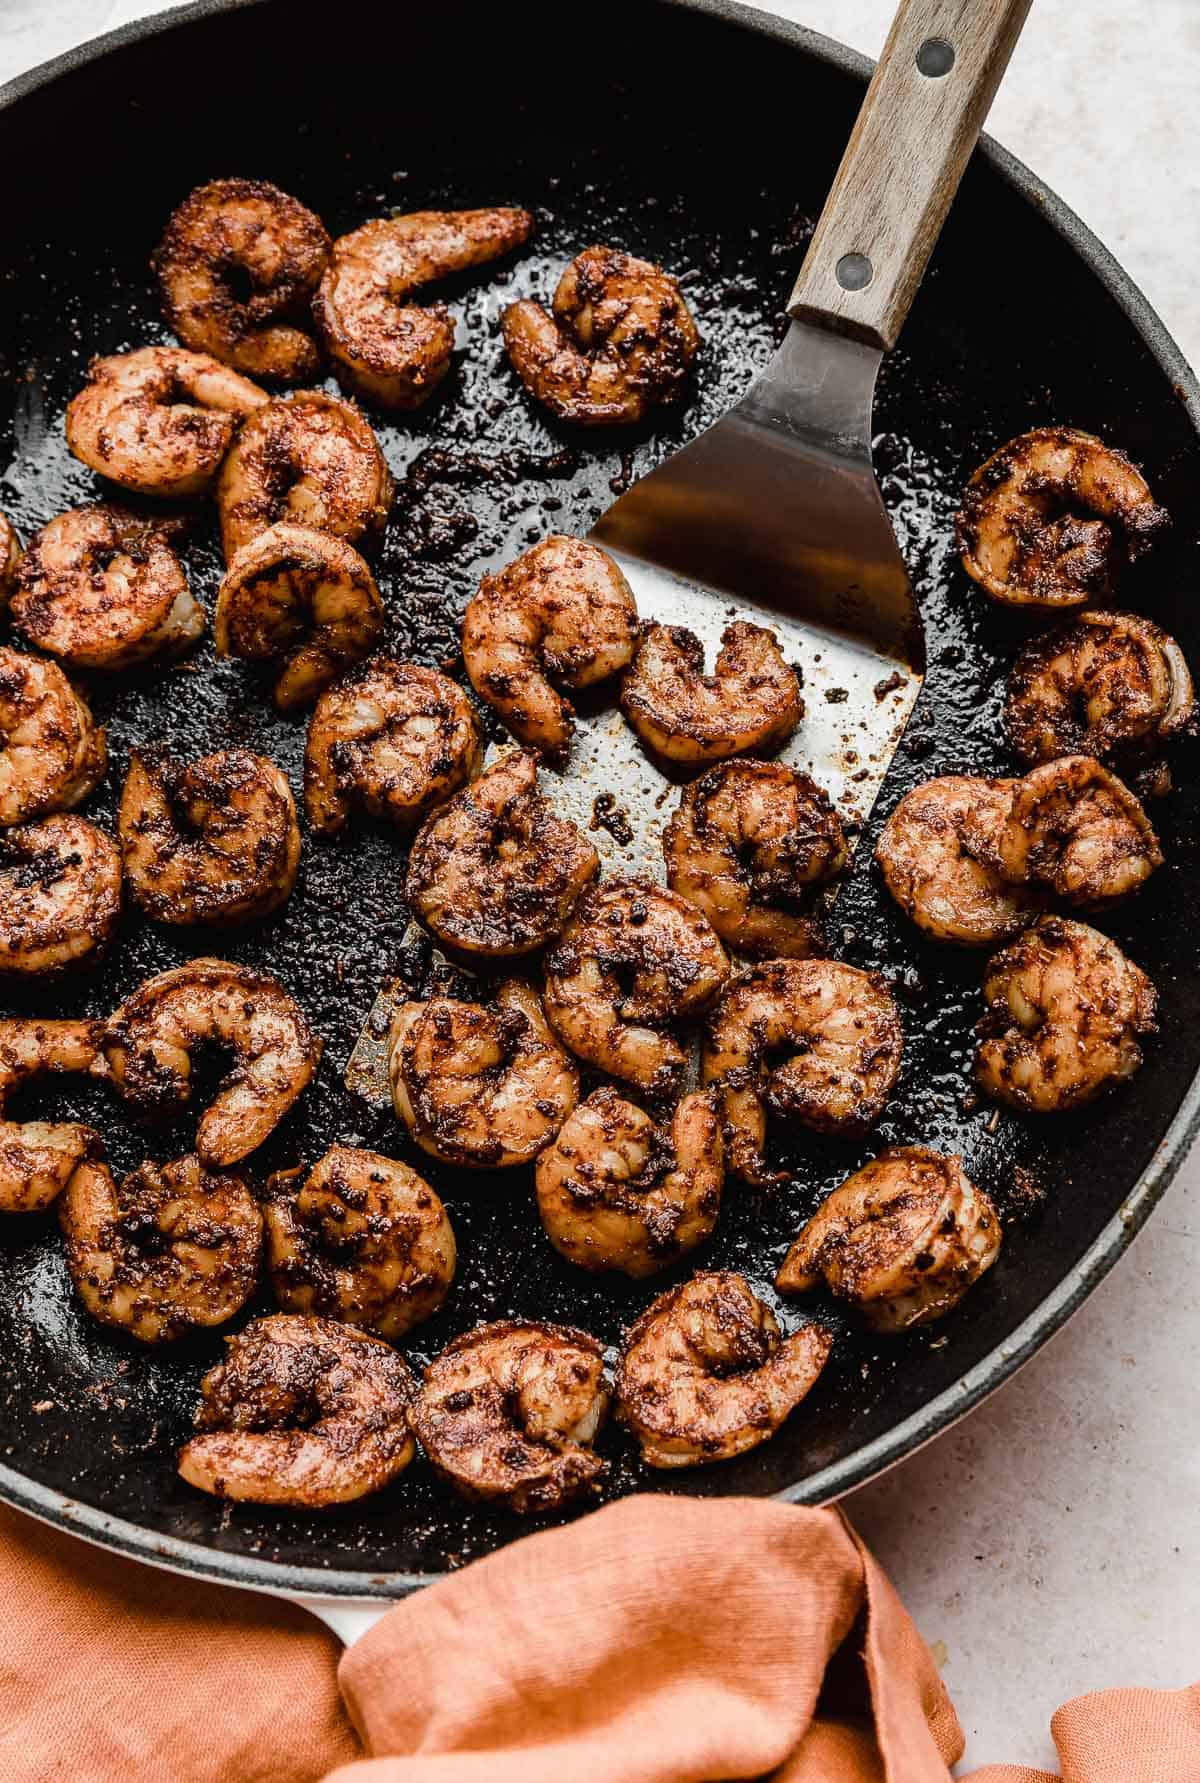 A metal spatula scooping up cooked Blackened Shrimp from a black skillet.